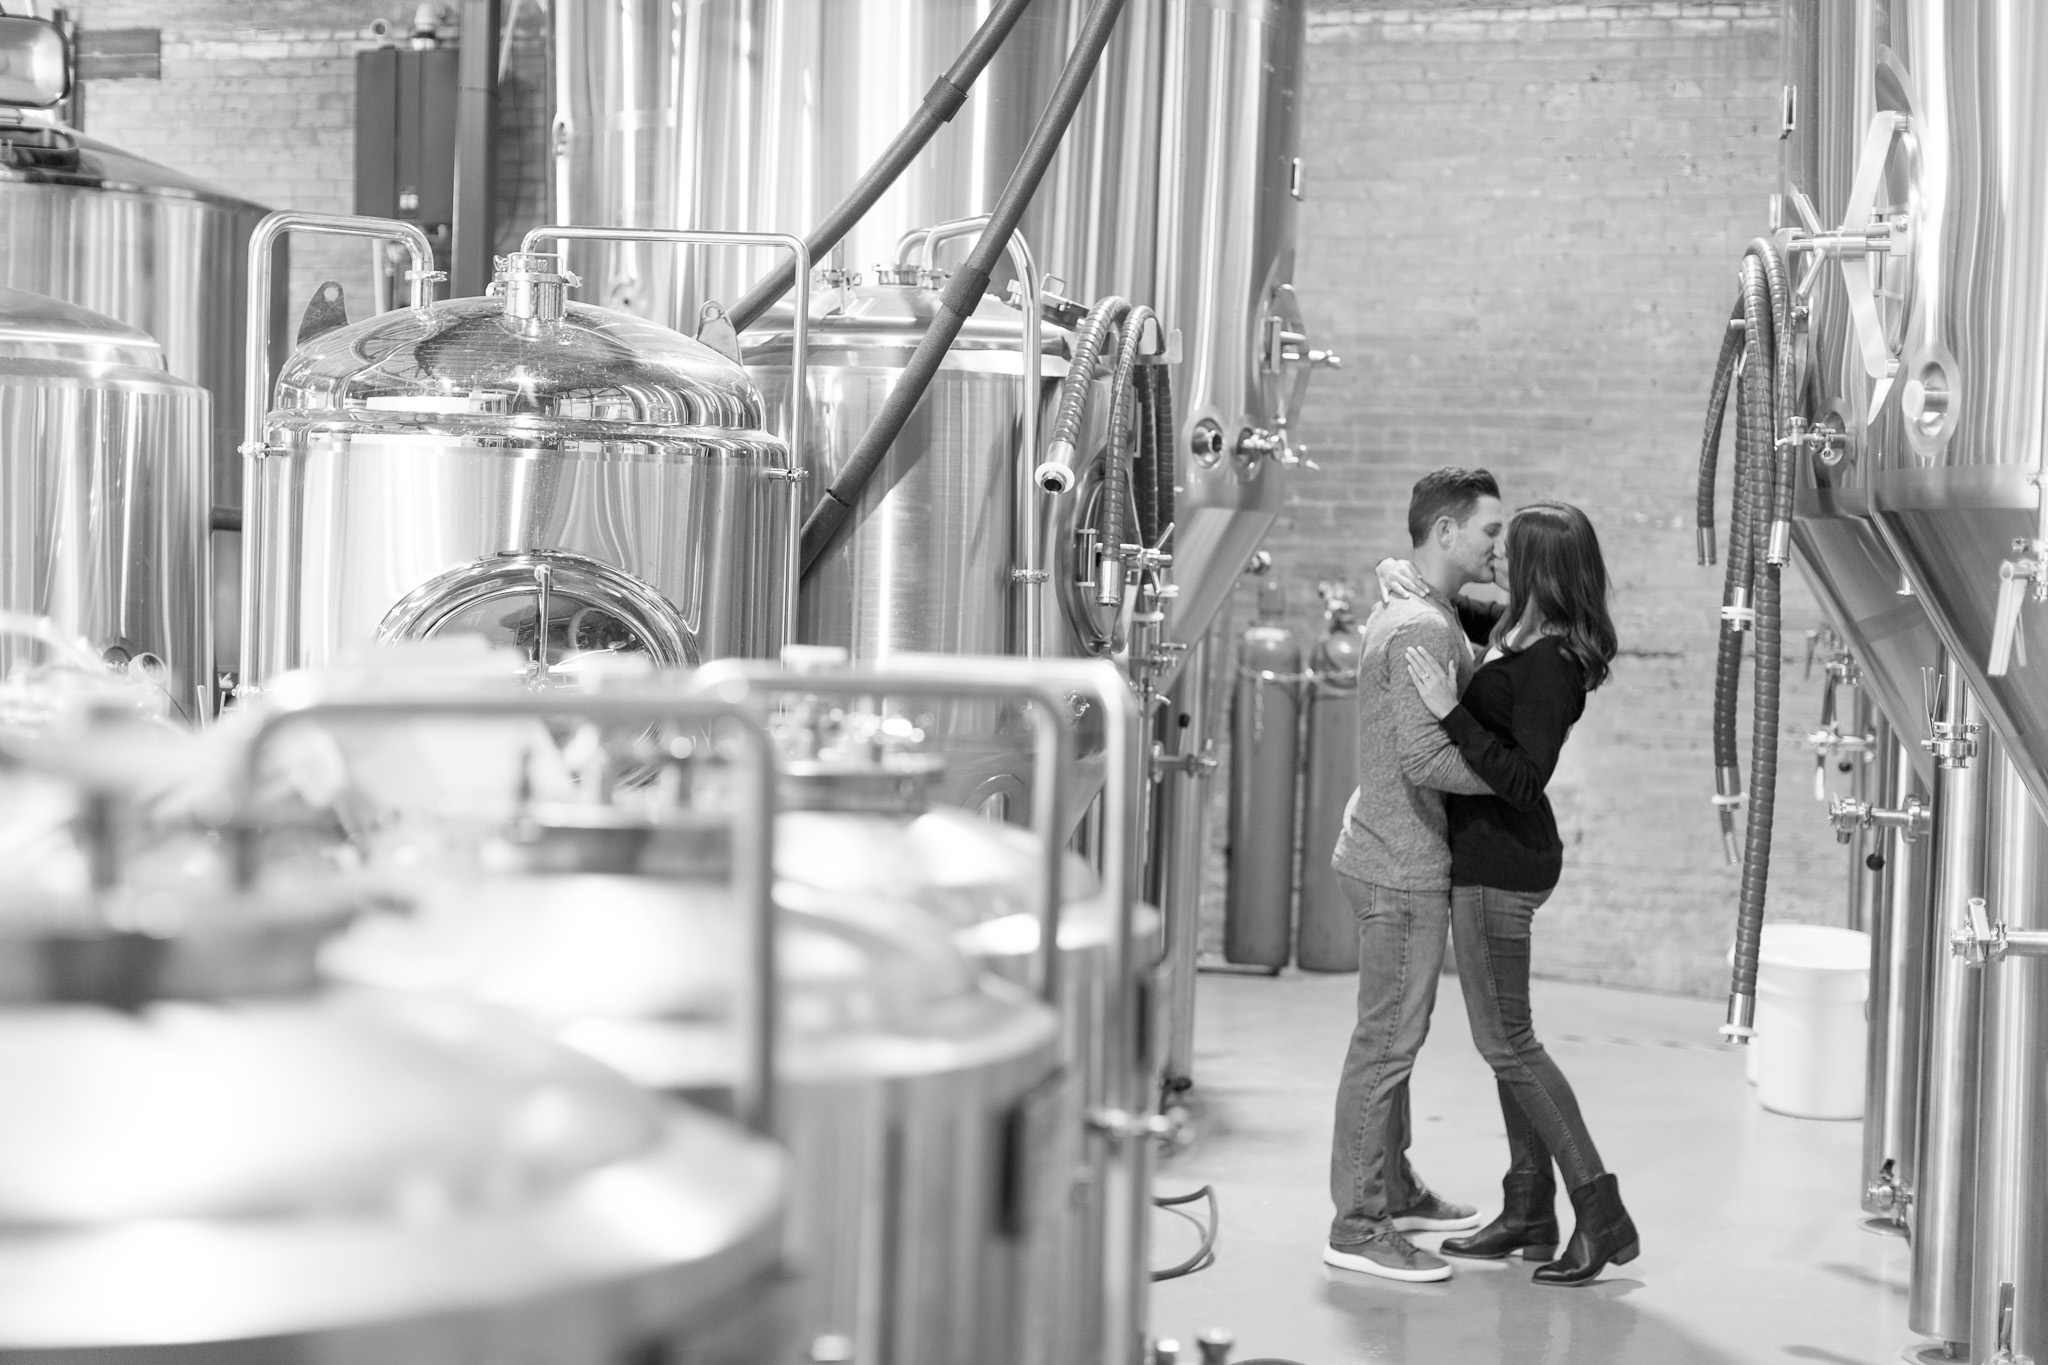 brewery engagement photos